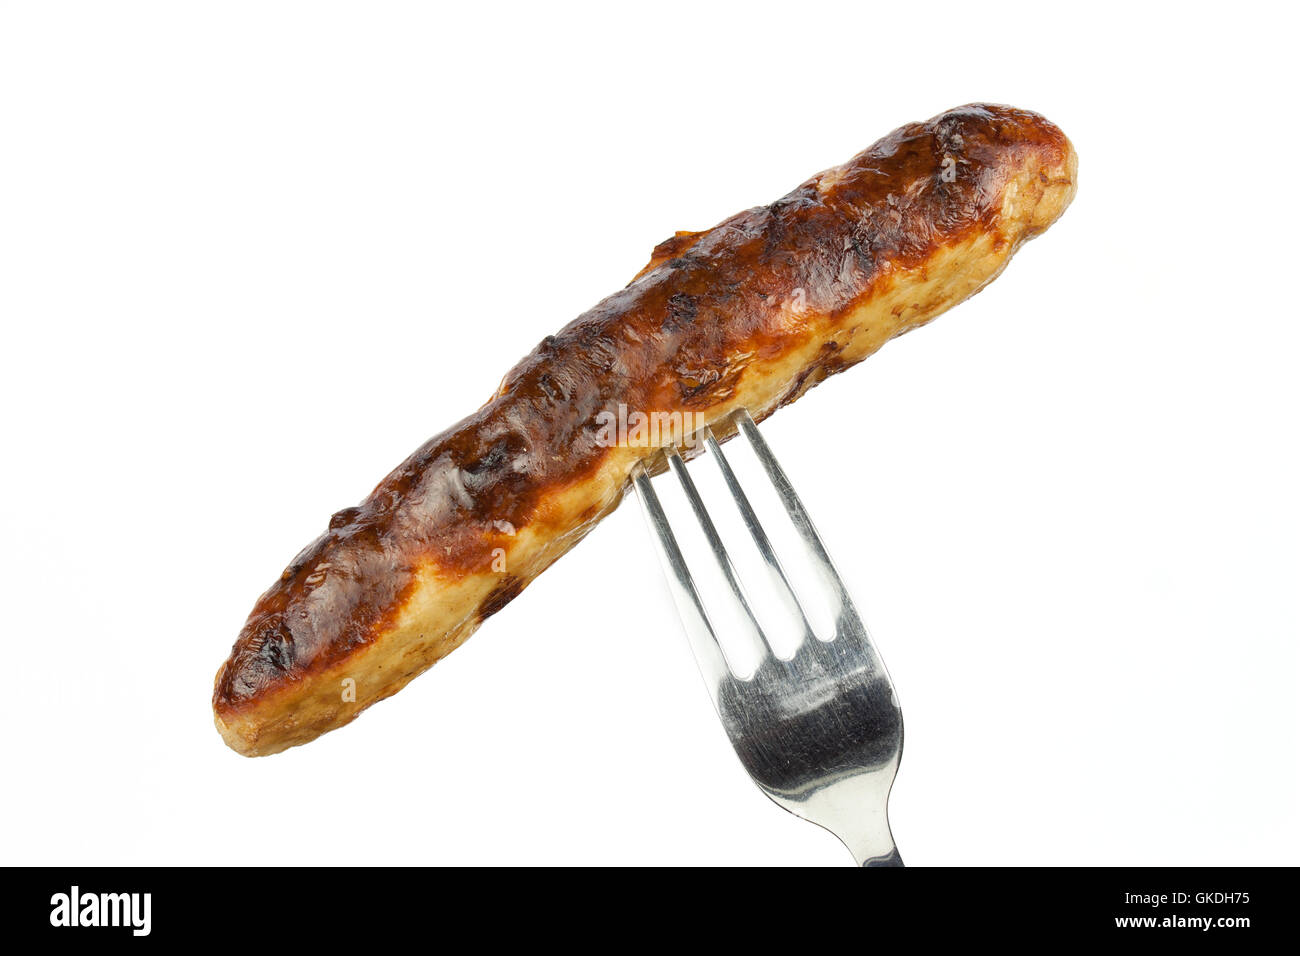 Grill barbecue saucisse Banque D'Images